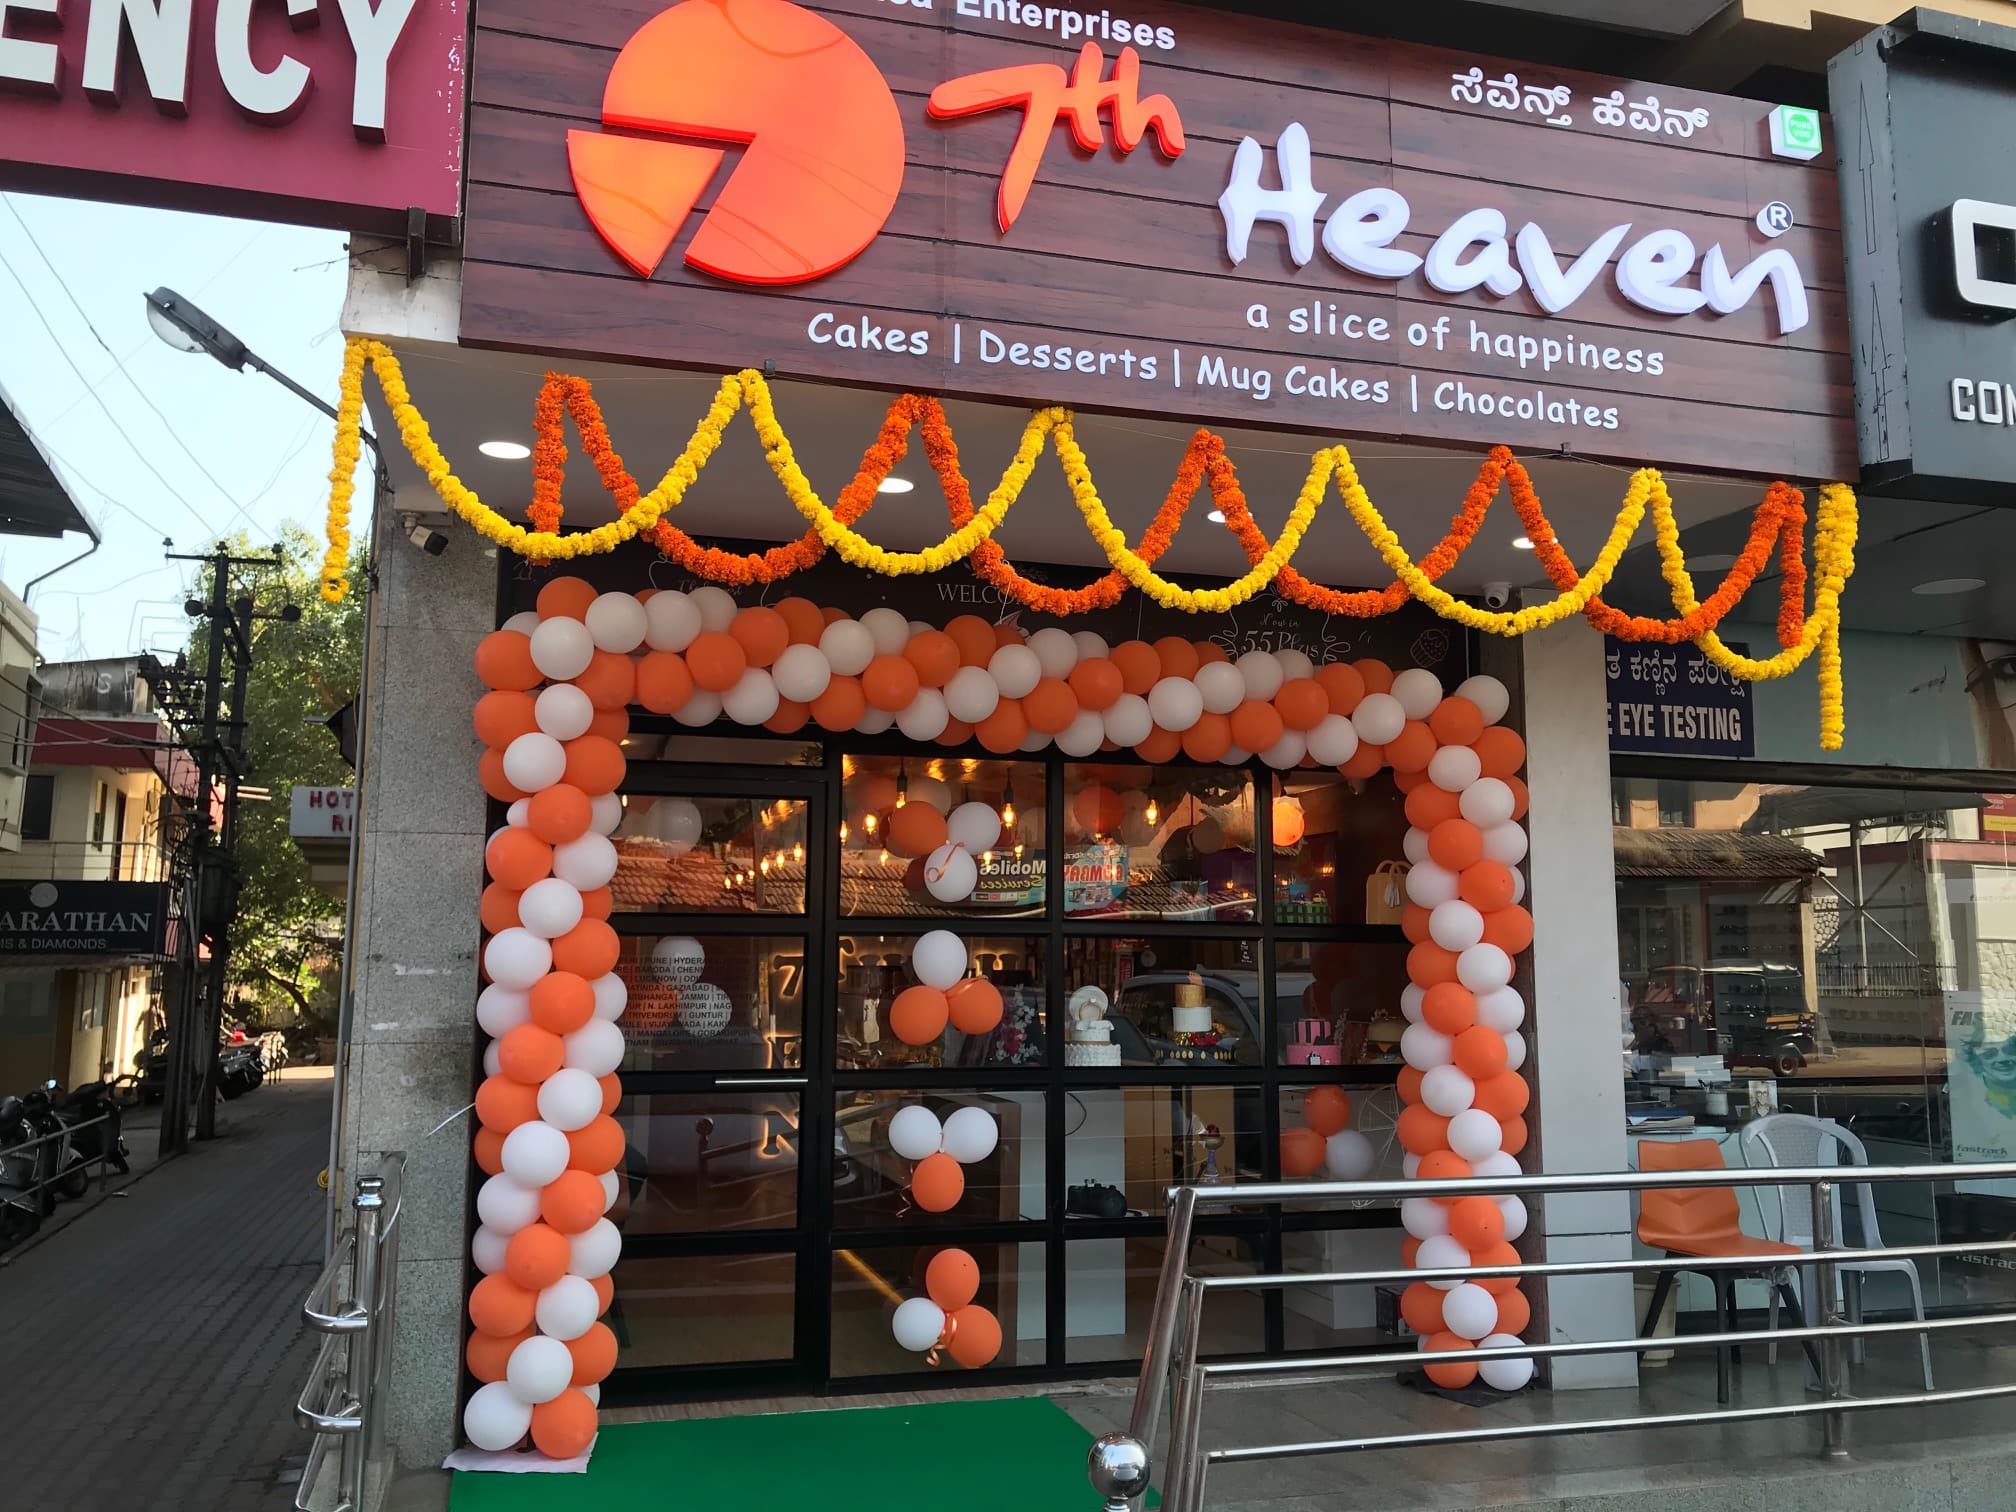 7th Heaven Cake Shop, Mangalore - Restaurant Menu, Reviews and Prices